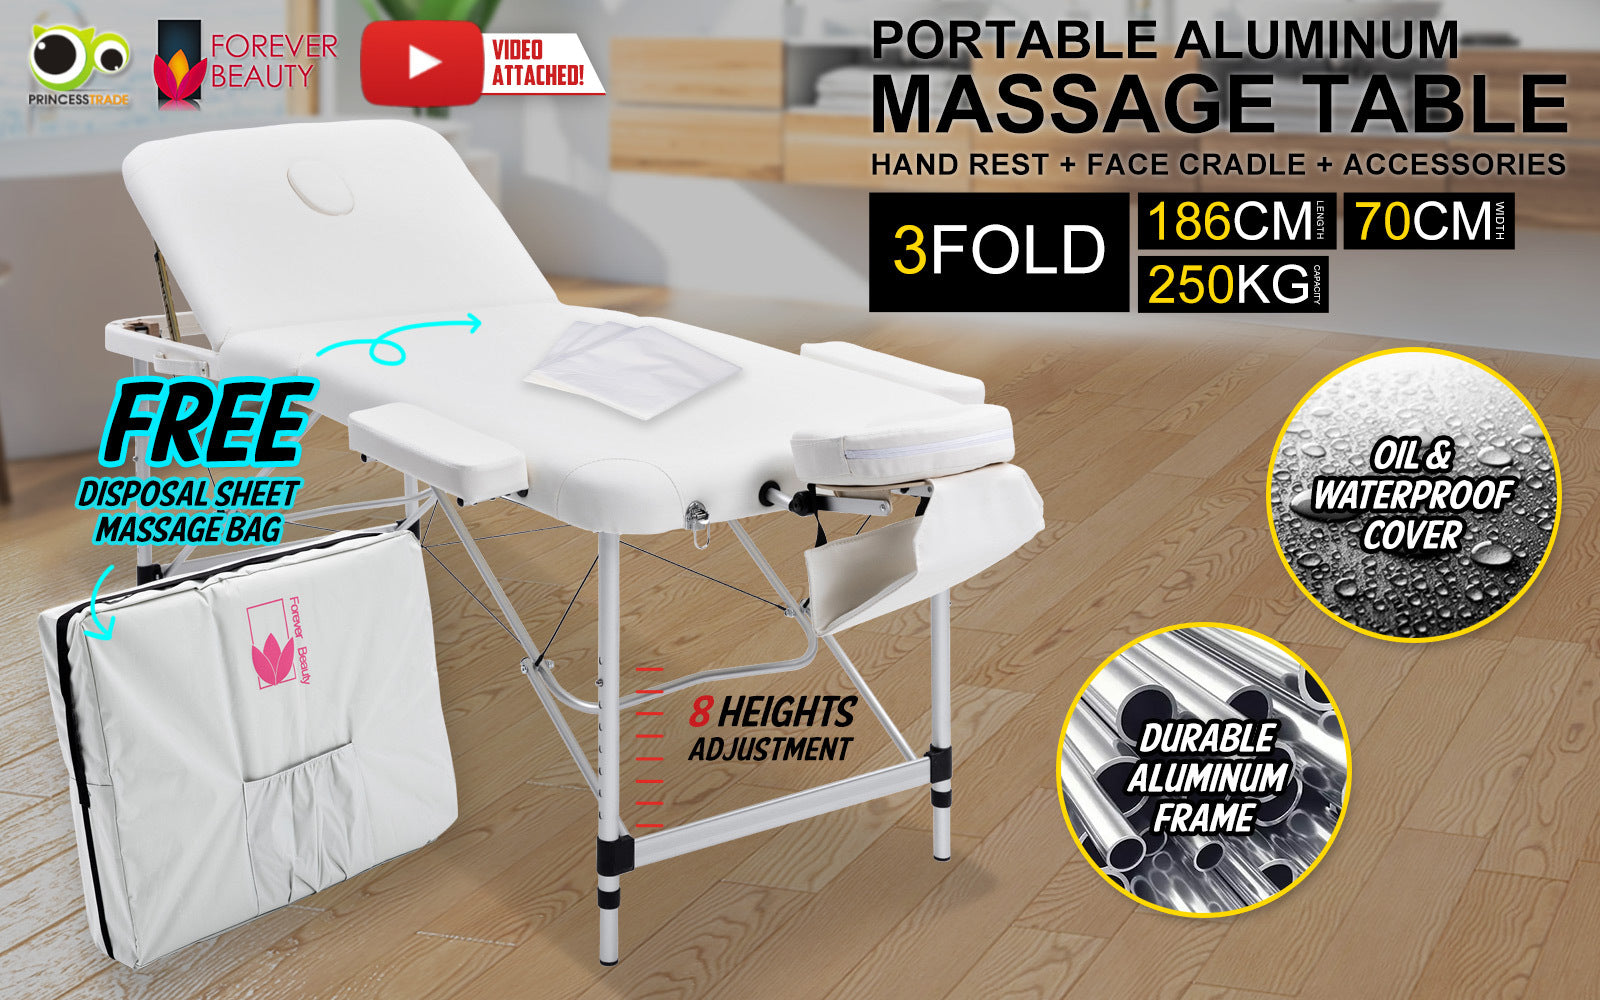 forever-beauty-white-portable-beauty-massage-table-bed-therapy-waxing-3-fold-70cm-aluminium